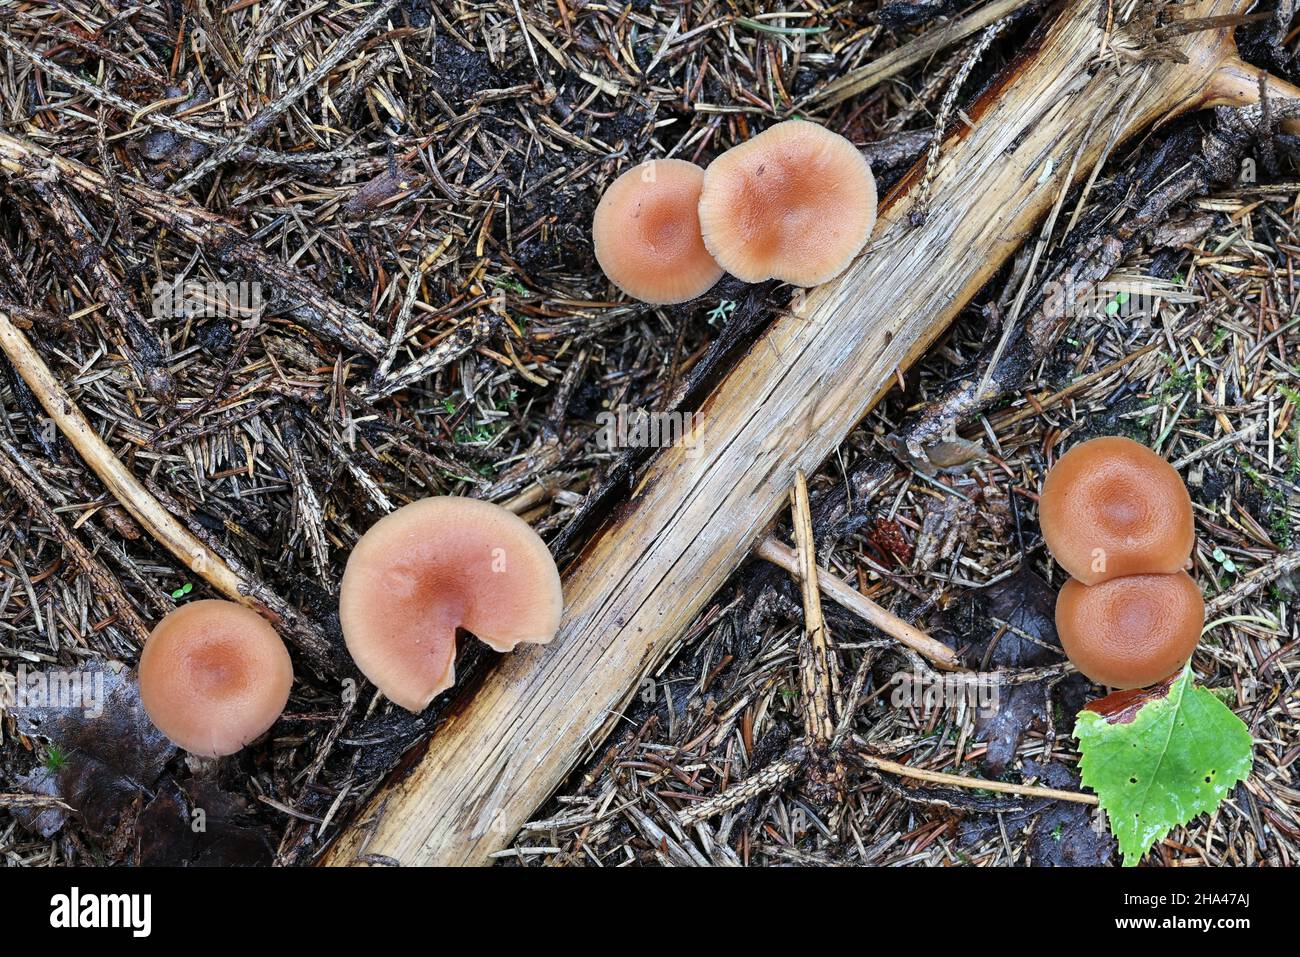 Laccaria proxima, known as the Scurfy Deceiver, wild mushroom from Finland Stock Photo